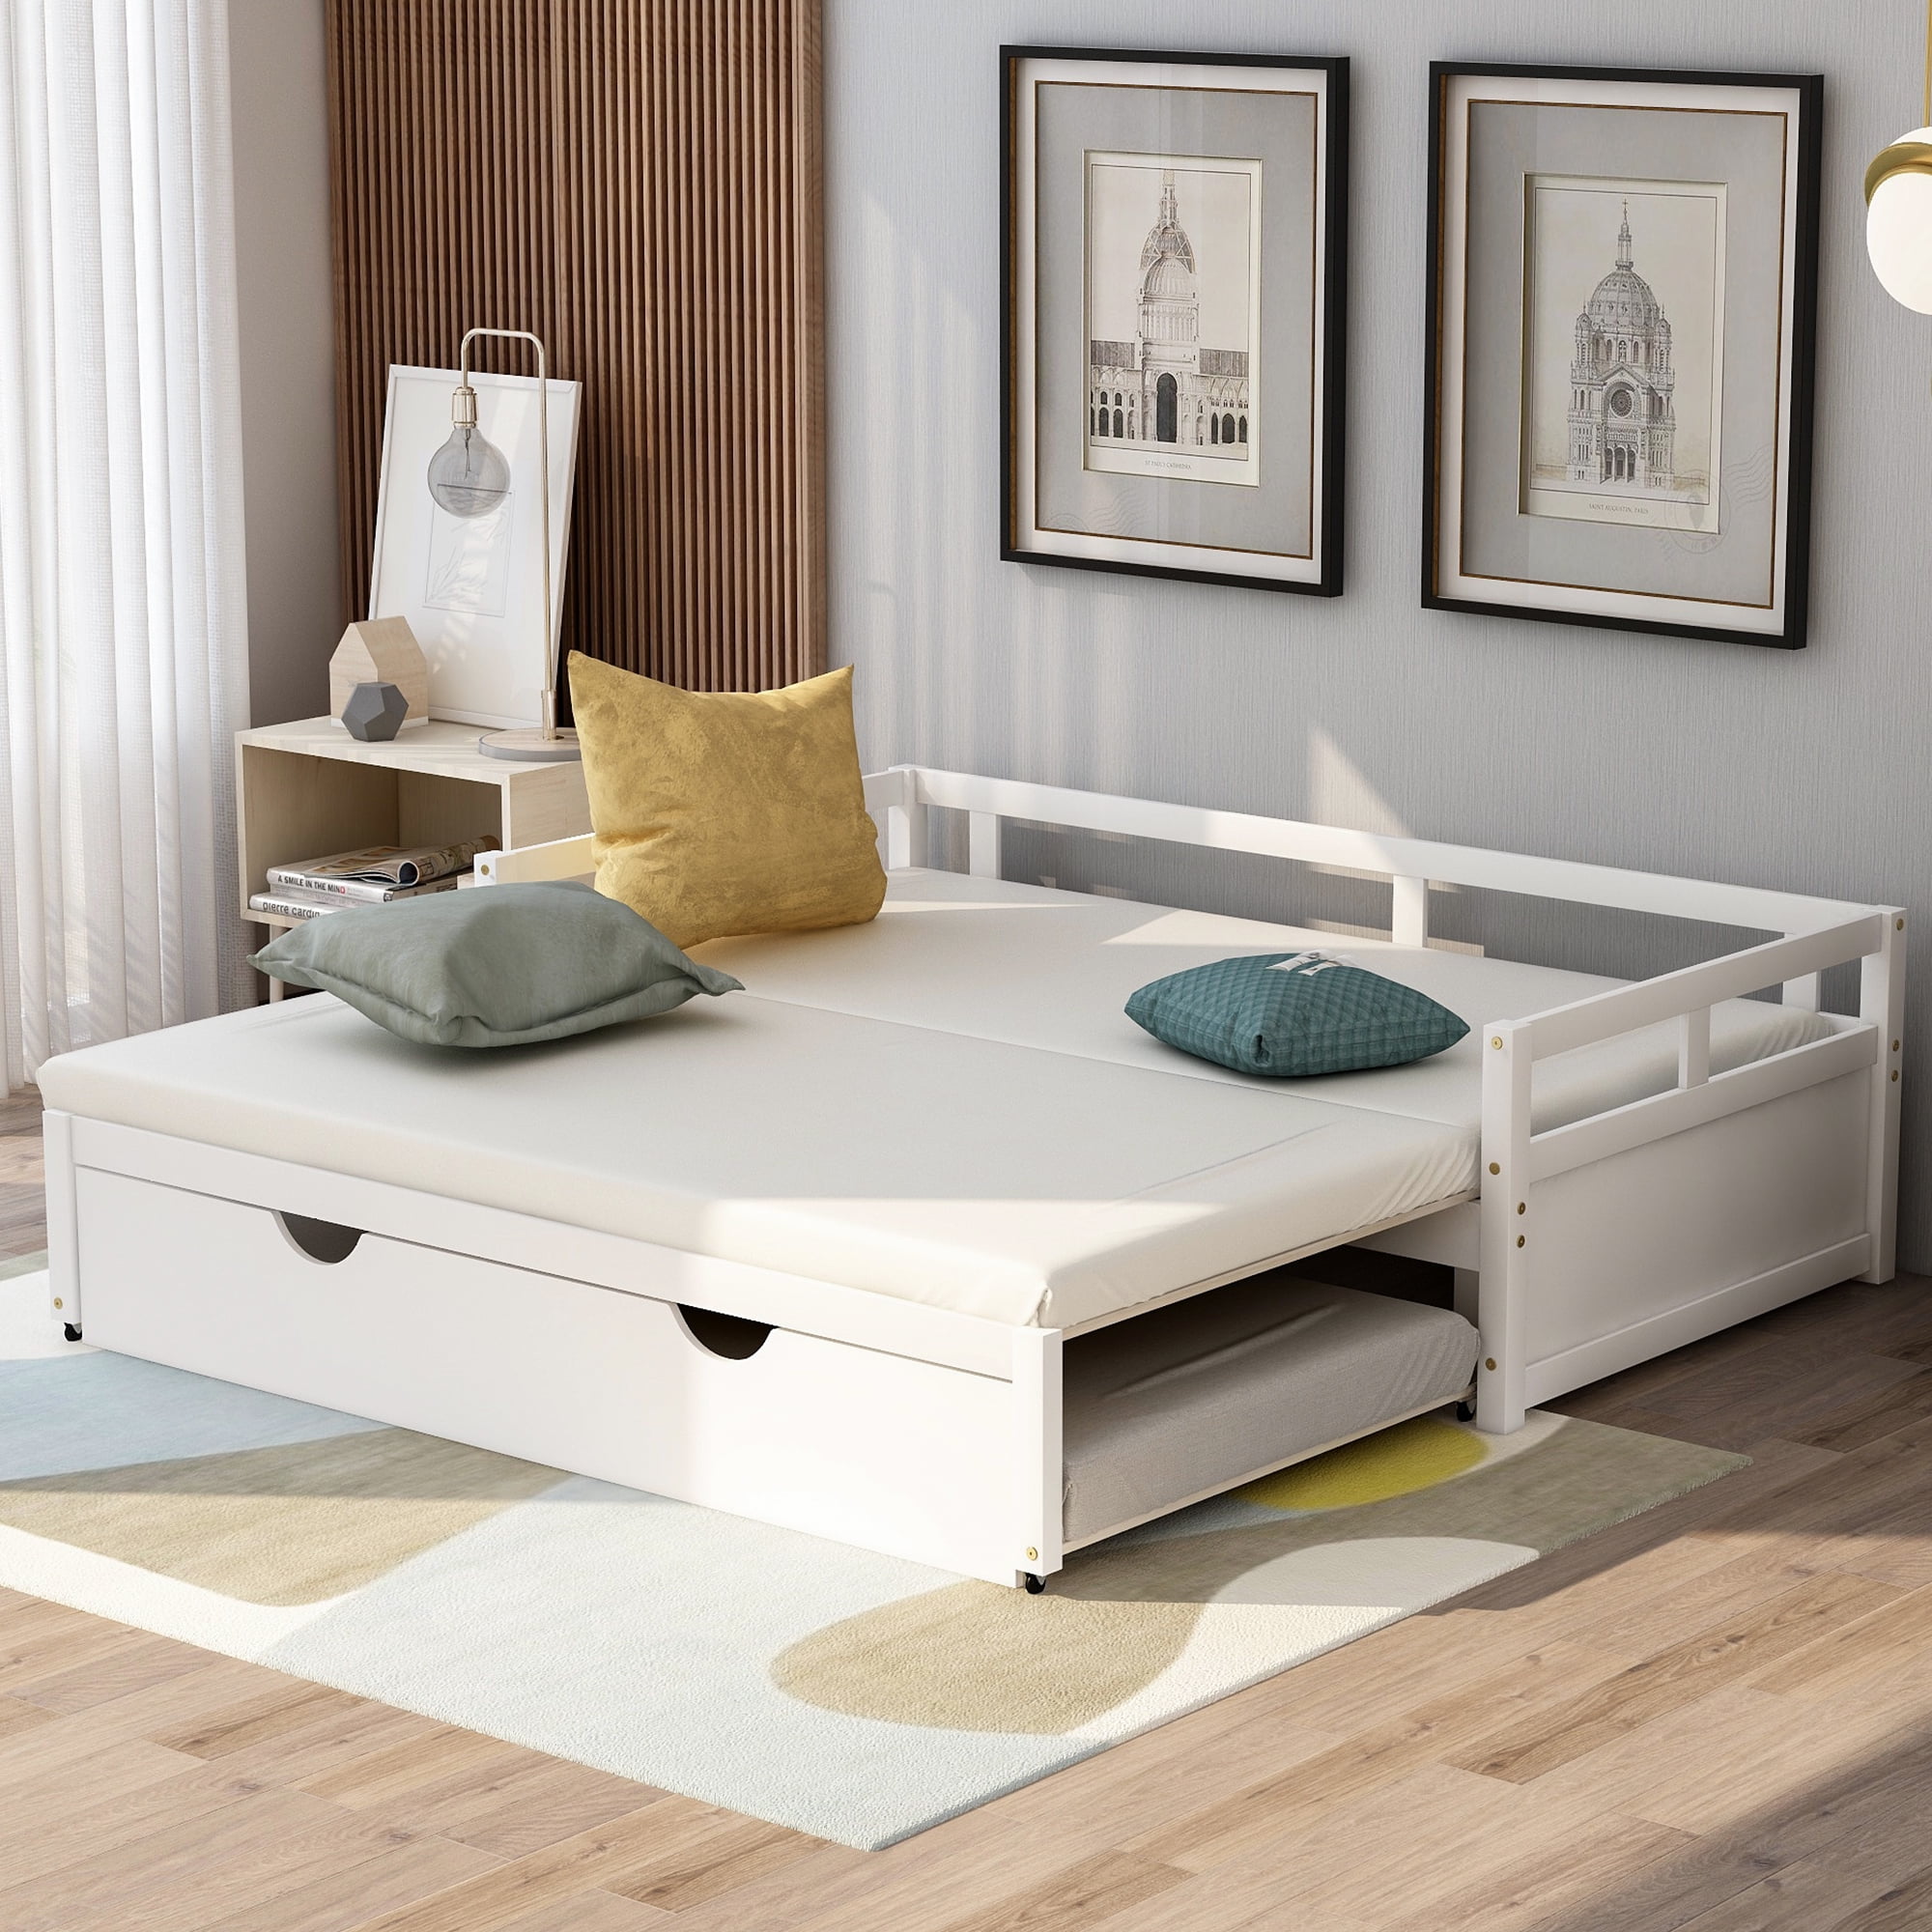 Wooden Twin Daybed Frame, Contemporary Twin Size Bed Frame, Bedroom ...